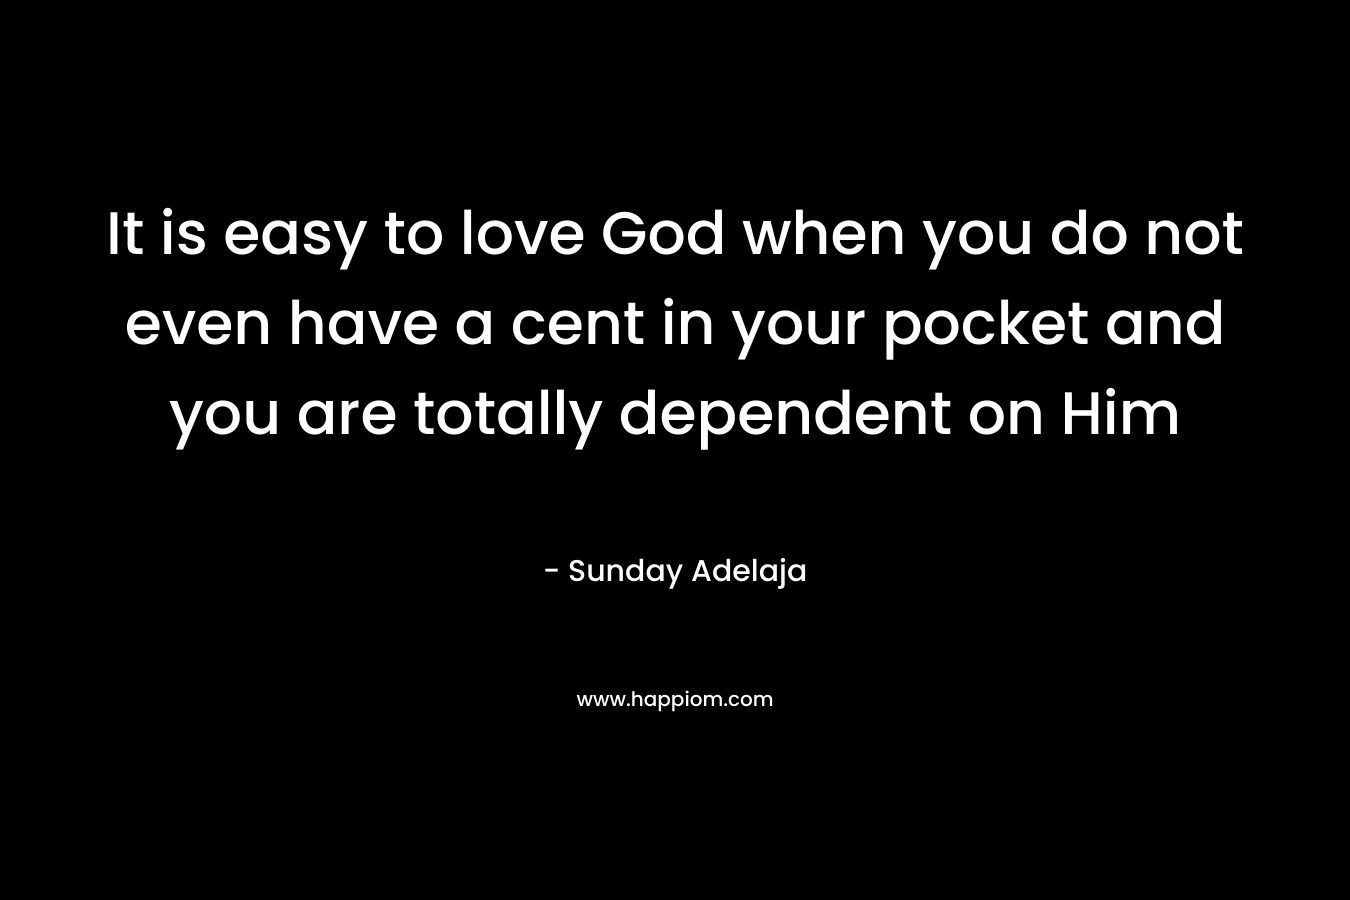 It is easy to love God when you do not even have a cent in your pocket and you are totally dependent on Him